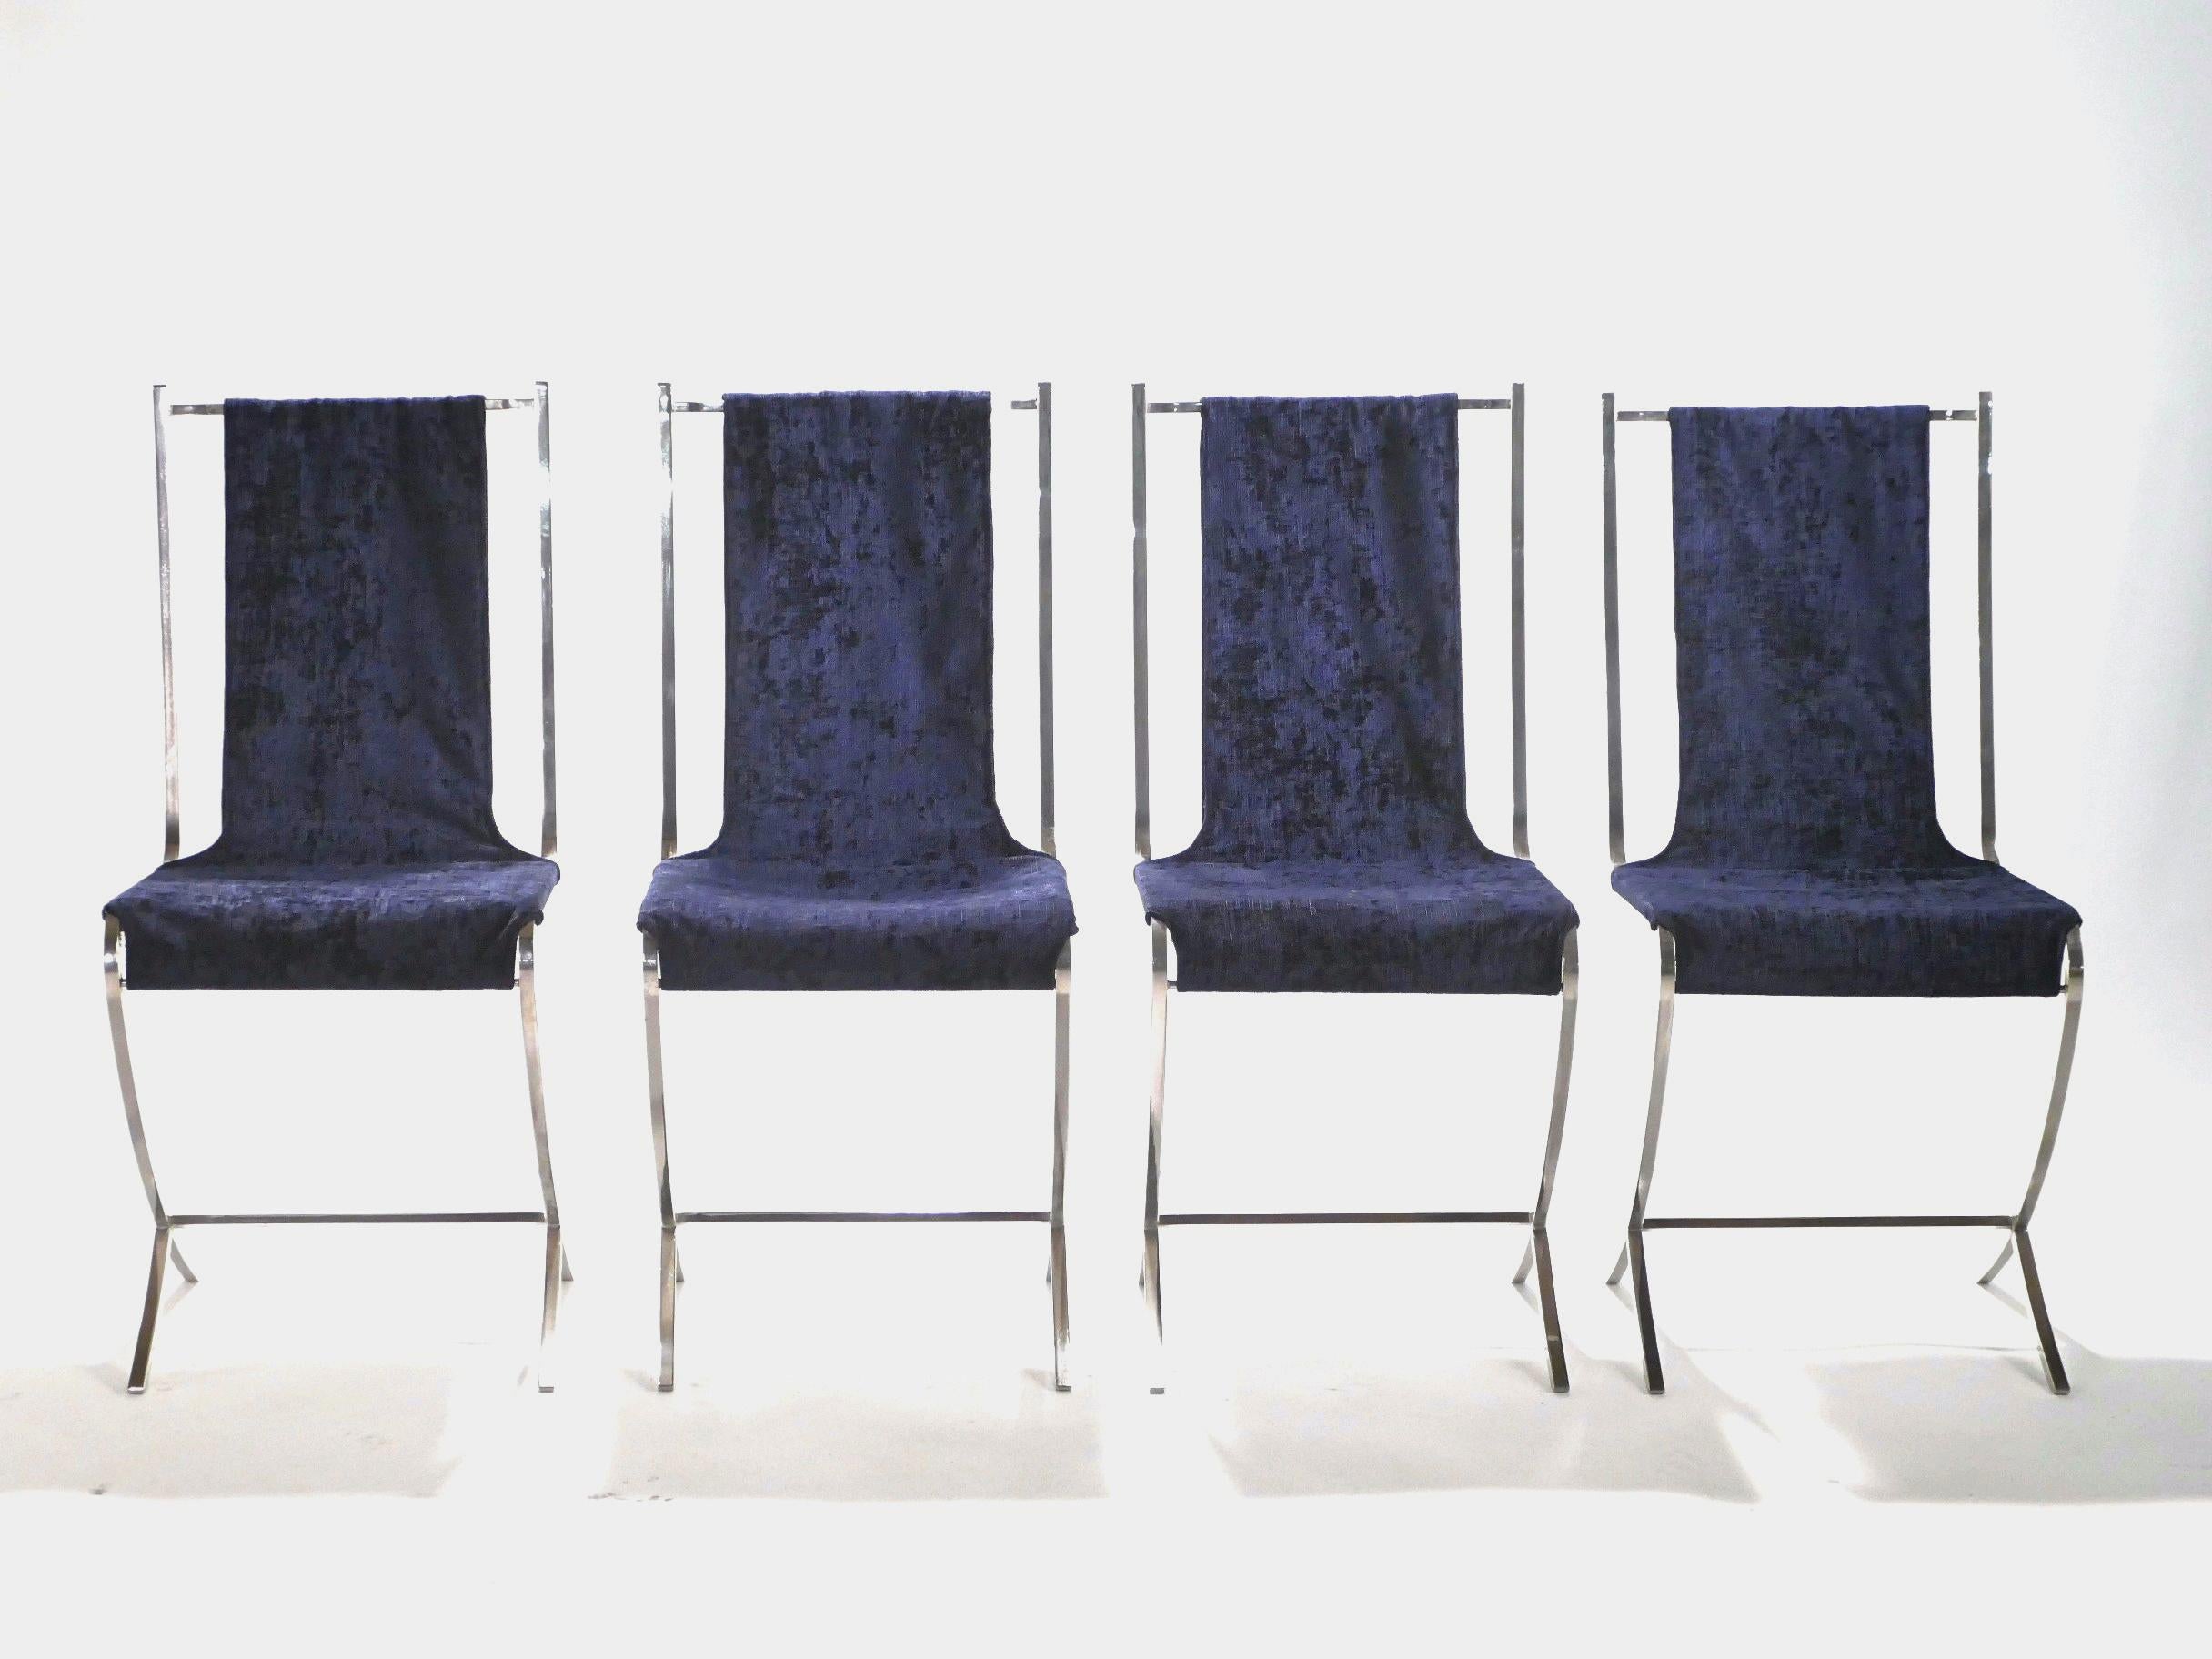 Lounge on extravagant deep blue velvet, suspended across a sturdy, but artfully imagined structure made of heavy nickeled metal. This set of six chairs was created by French Avant Garde designer Pierre Cardin for well-known interior design firm